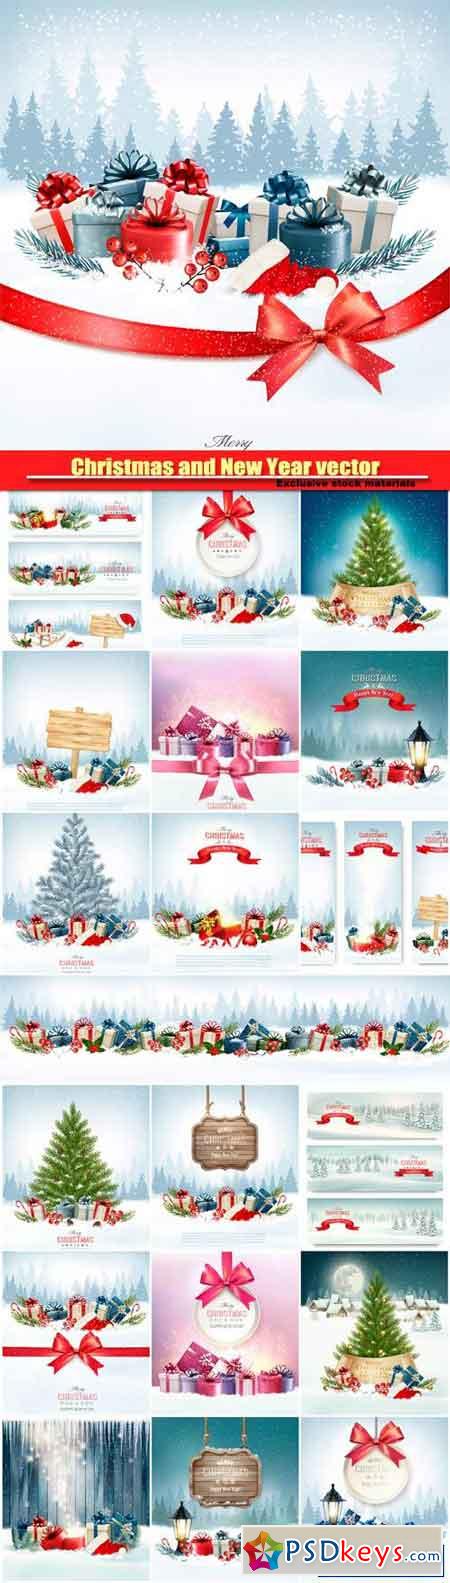 Christmas and New Year vector, holiday background, christmas tree and presents